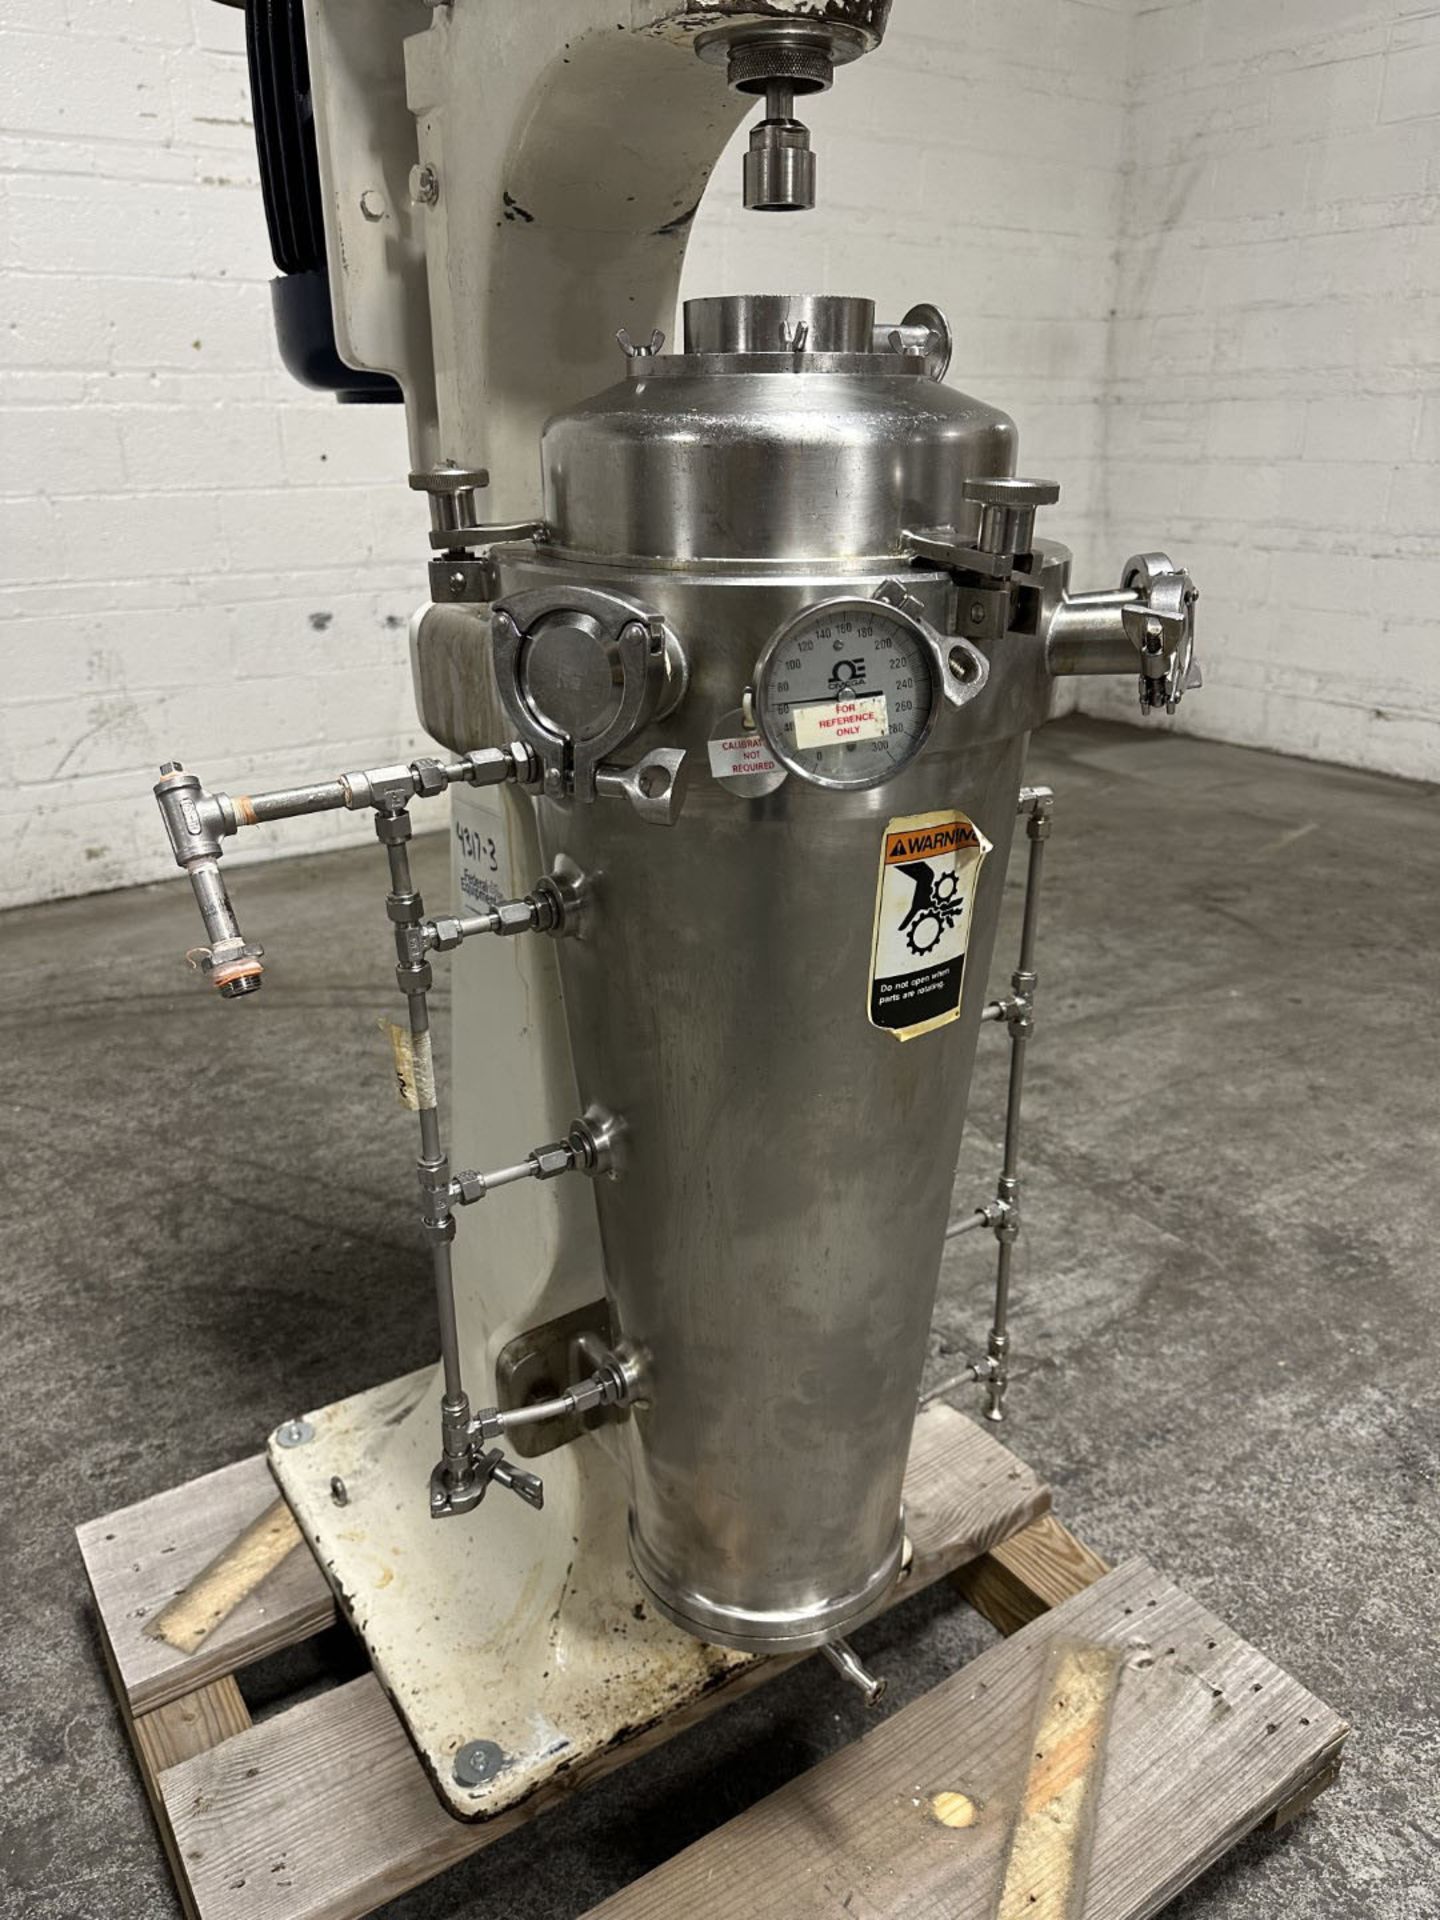 Sharples vaporite super centrifuge, model AS16VB, stainless steel construction, 17000 RPM max speed, - Image 14 of 20